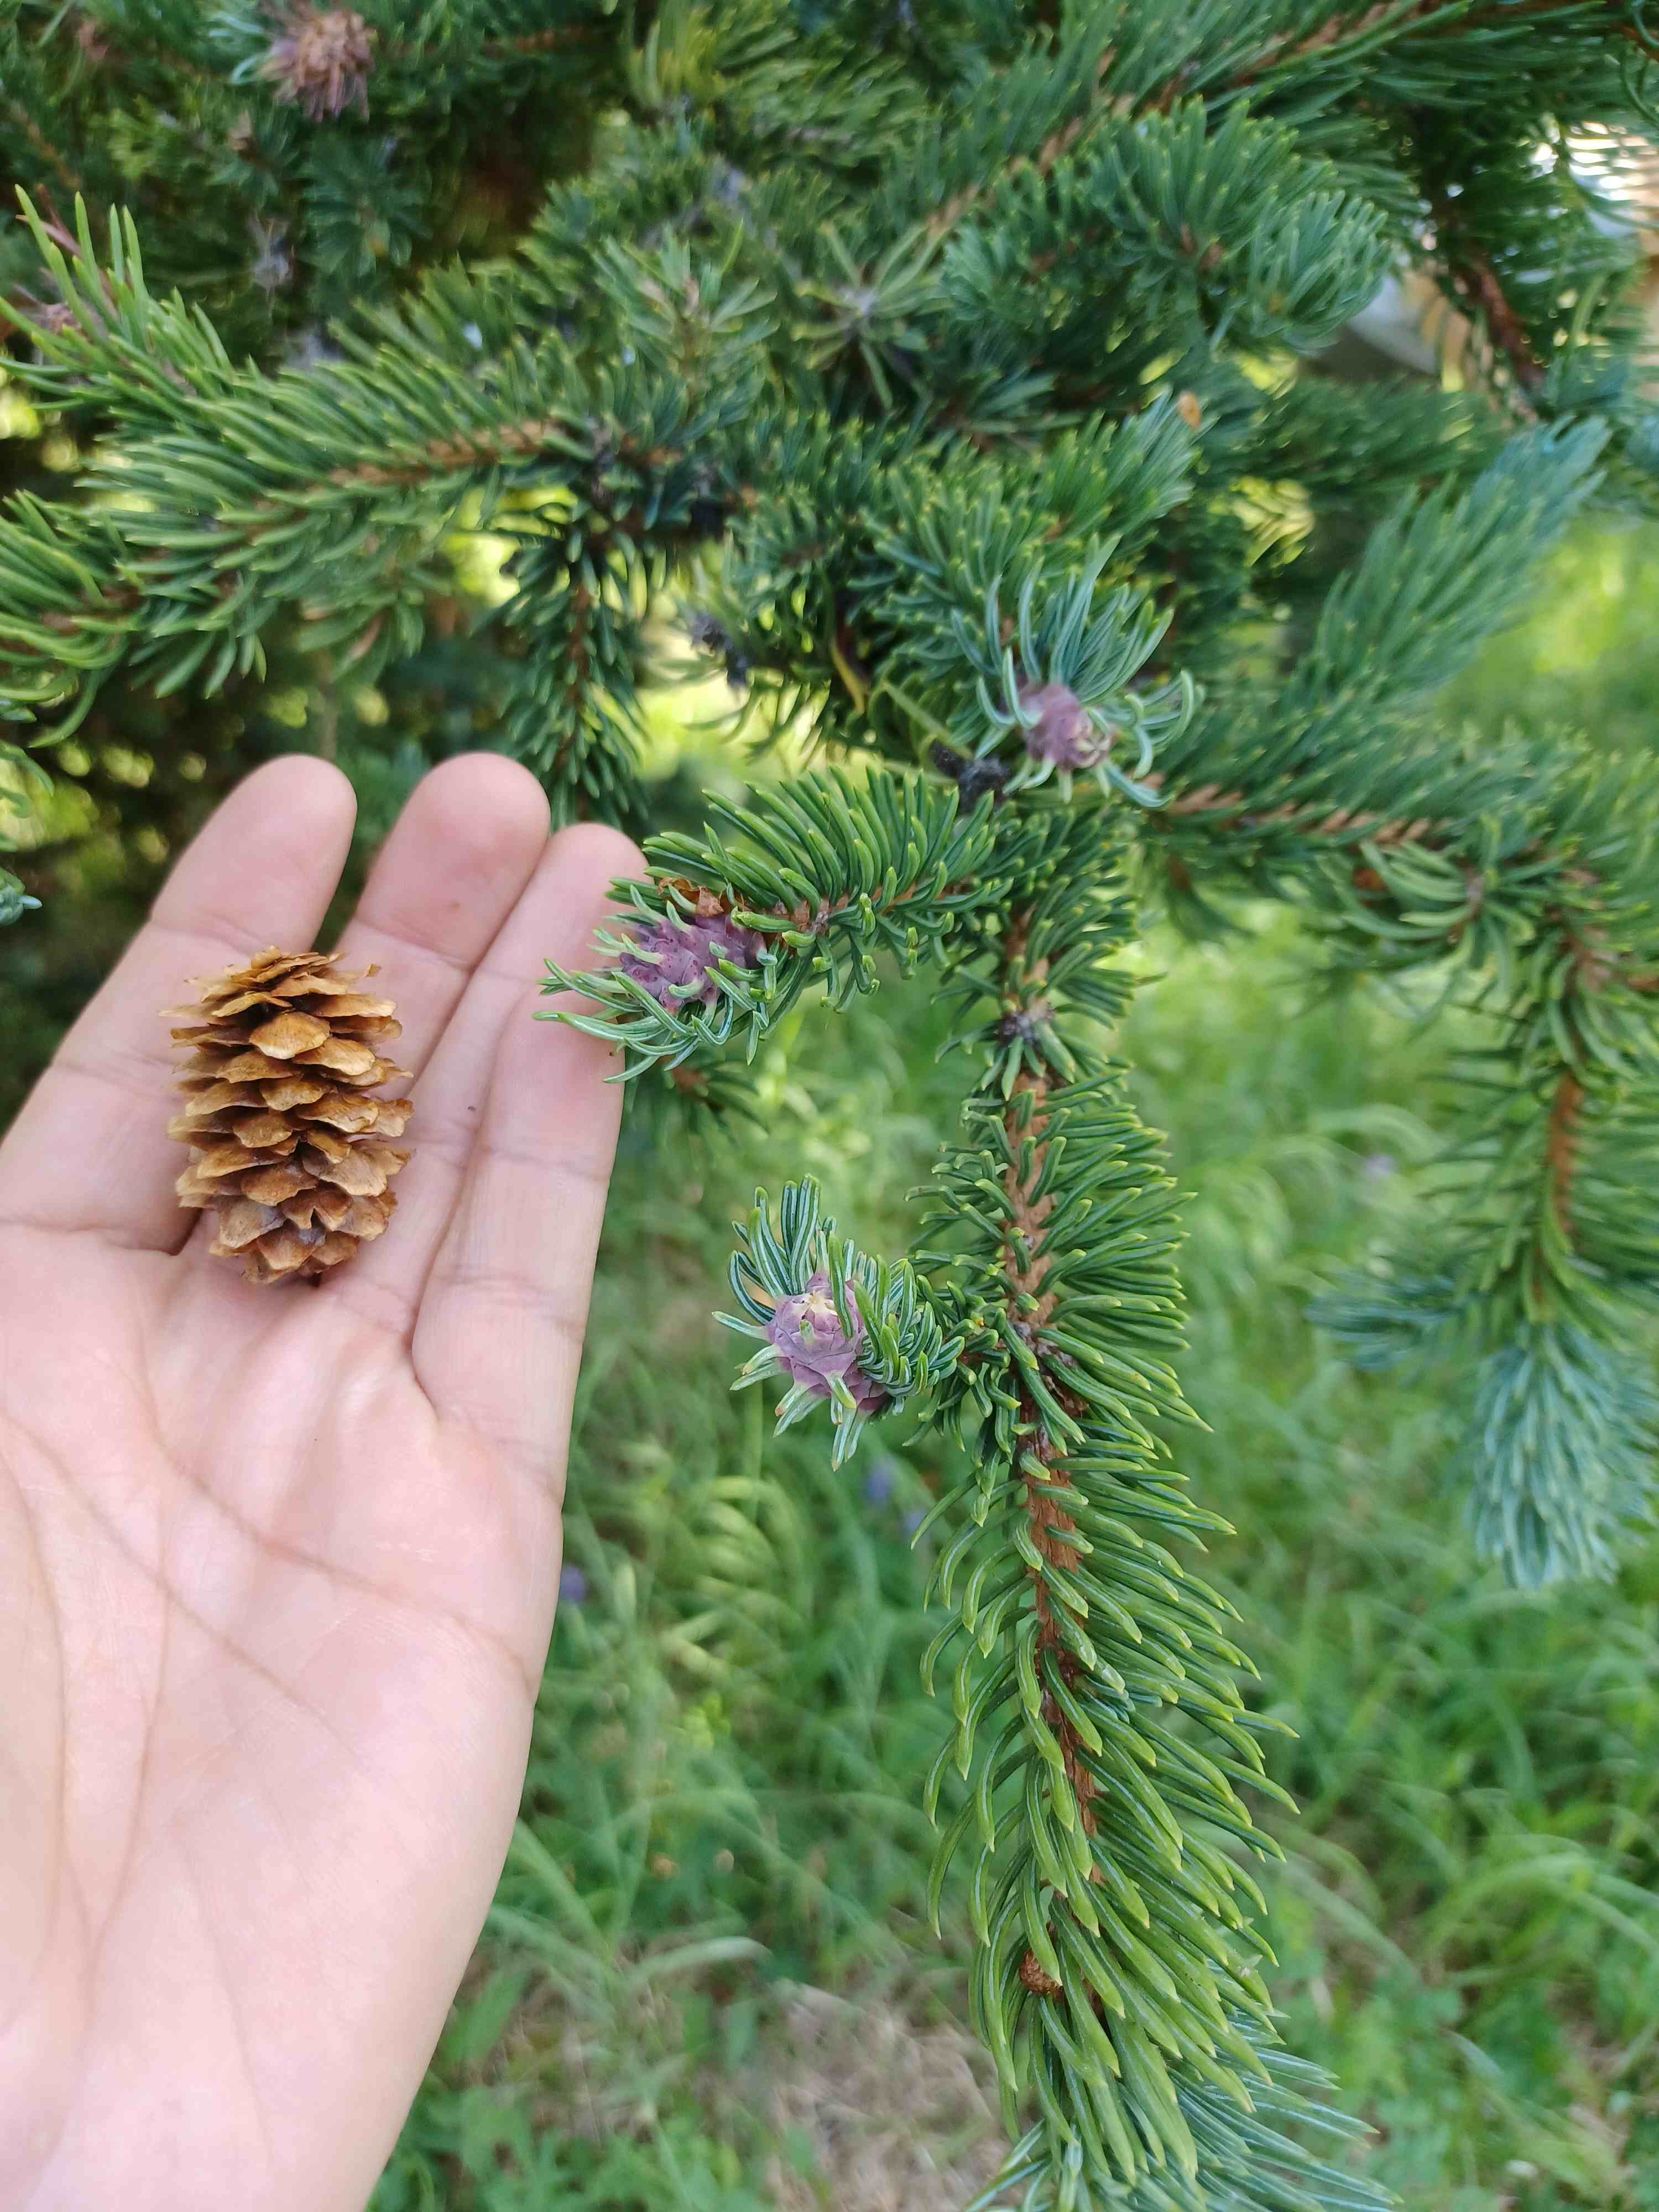 Picea engelmannii shoots and cone.